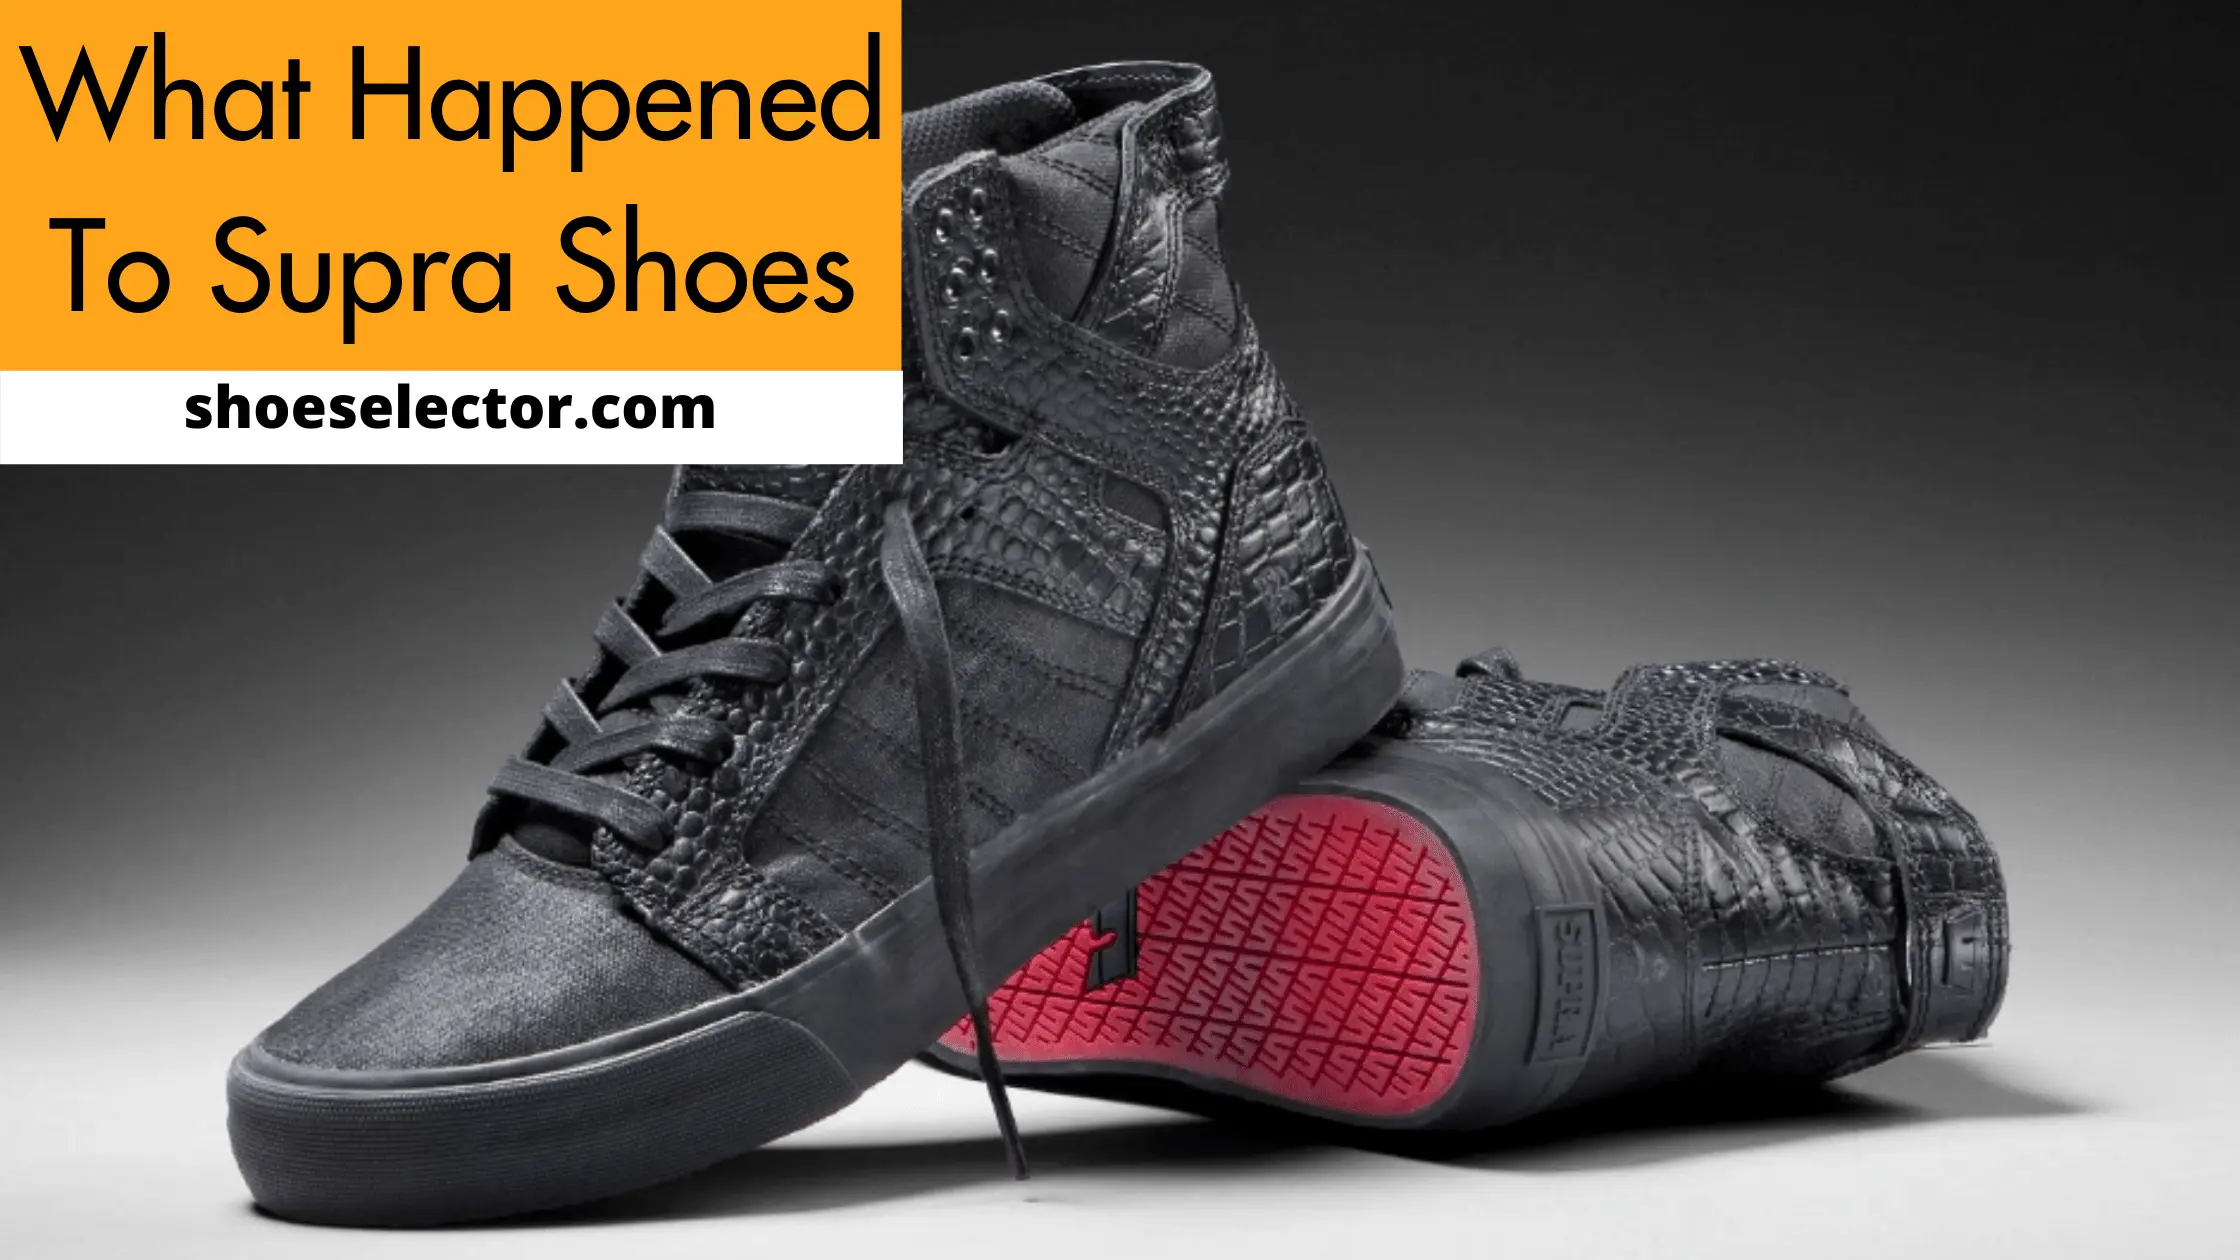 What Happened To Supra Shoes? - Easy Guide